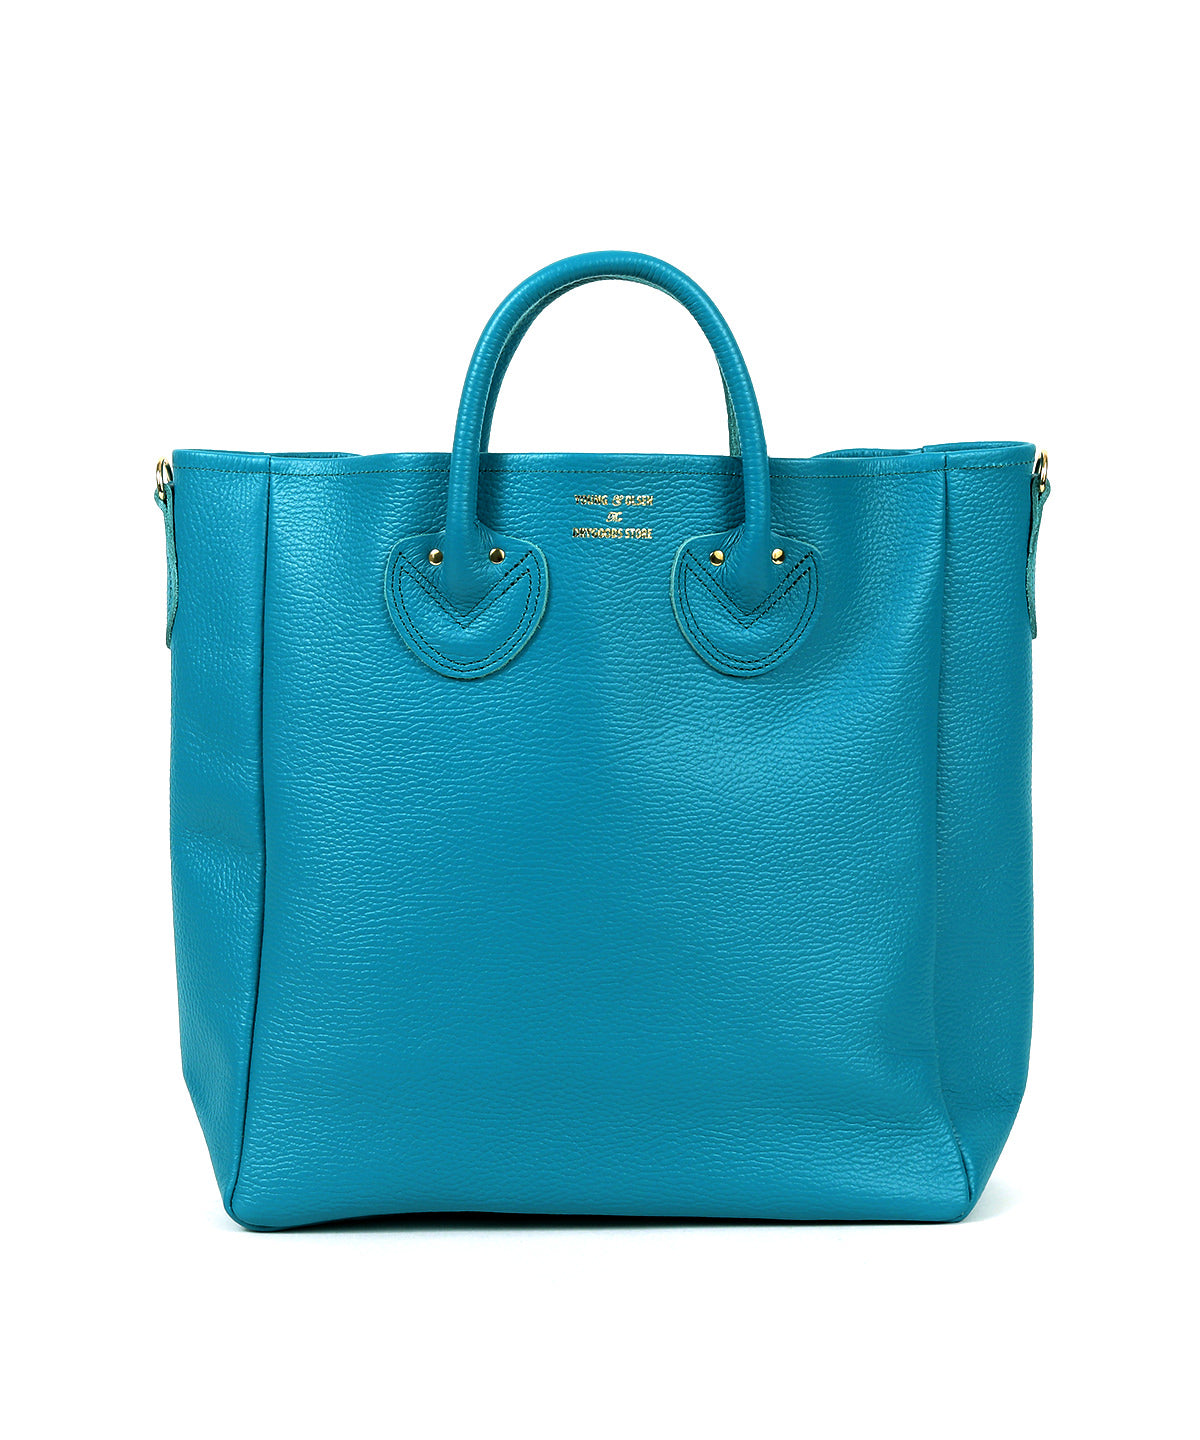 EMBOSSED LEATHER D TOTE Mバッグ